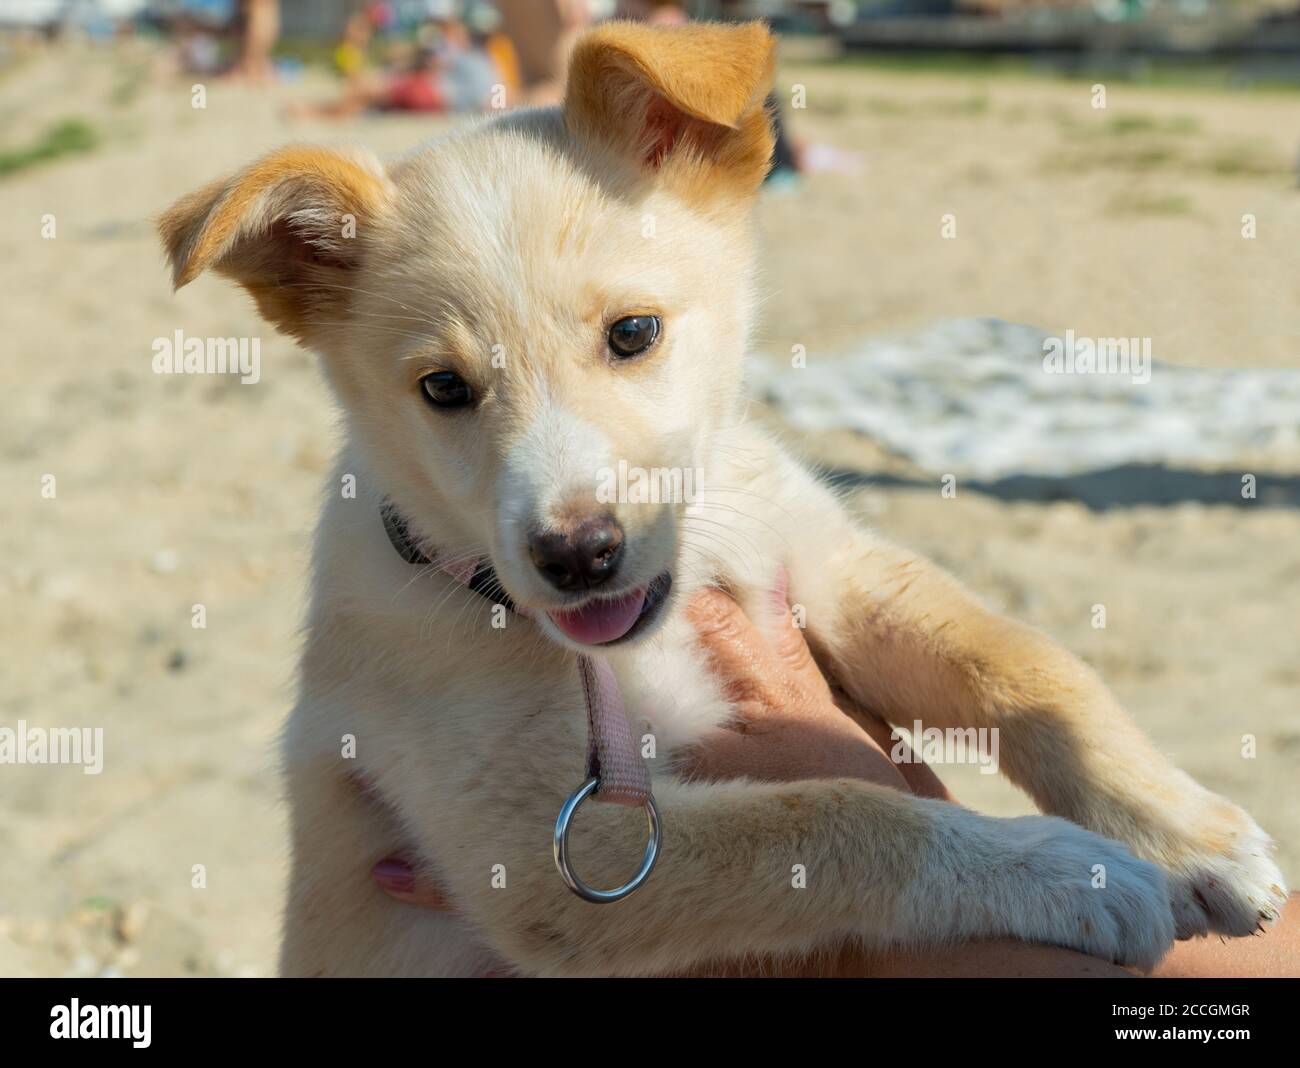 the cute dog puppy on the beach Stock Photo